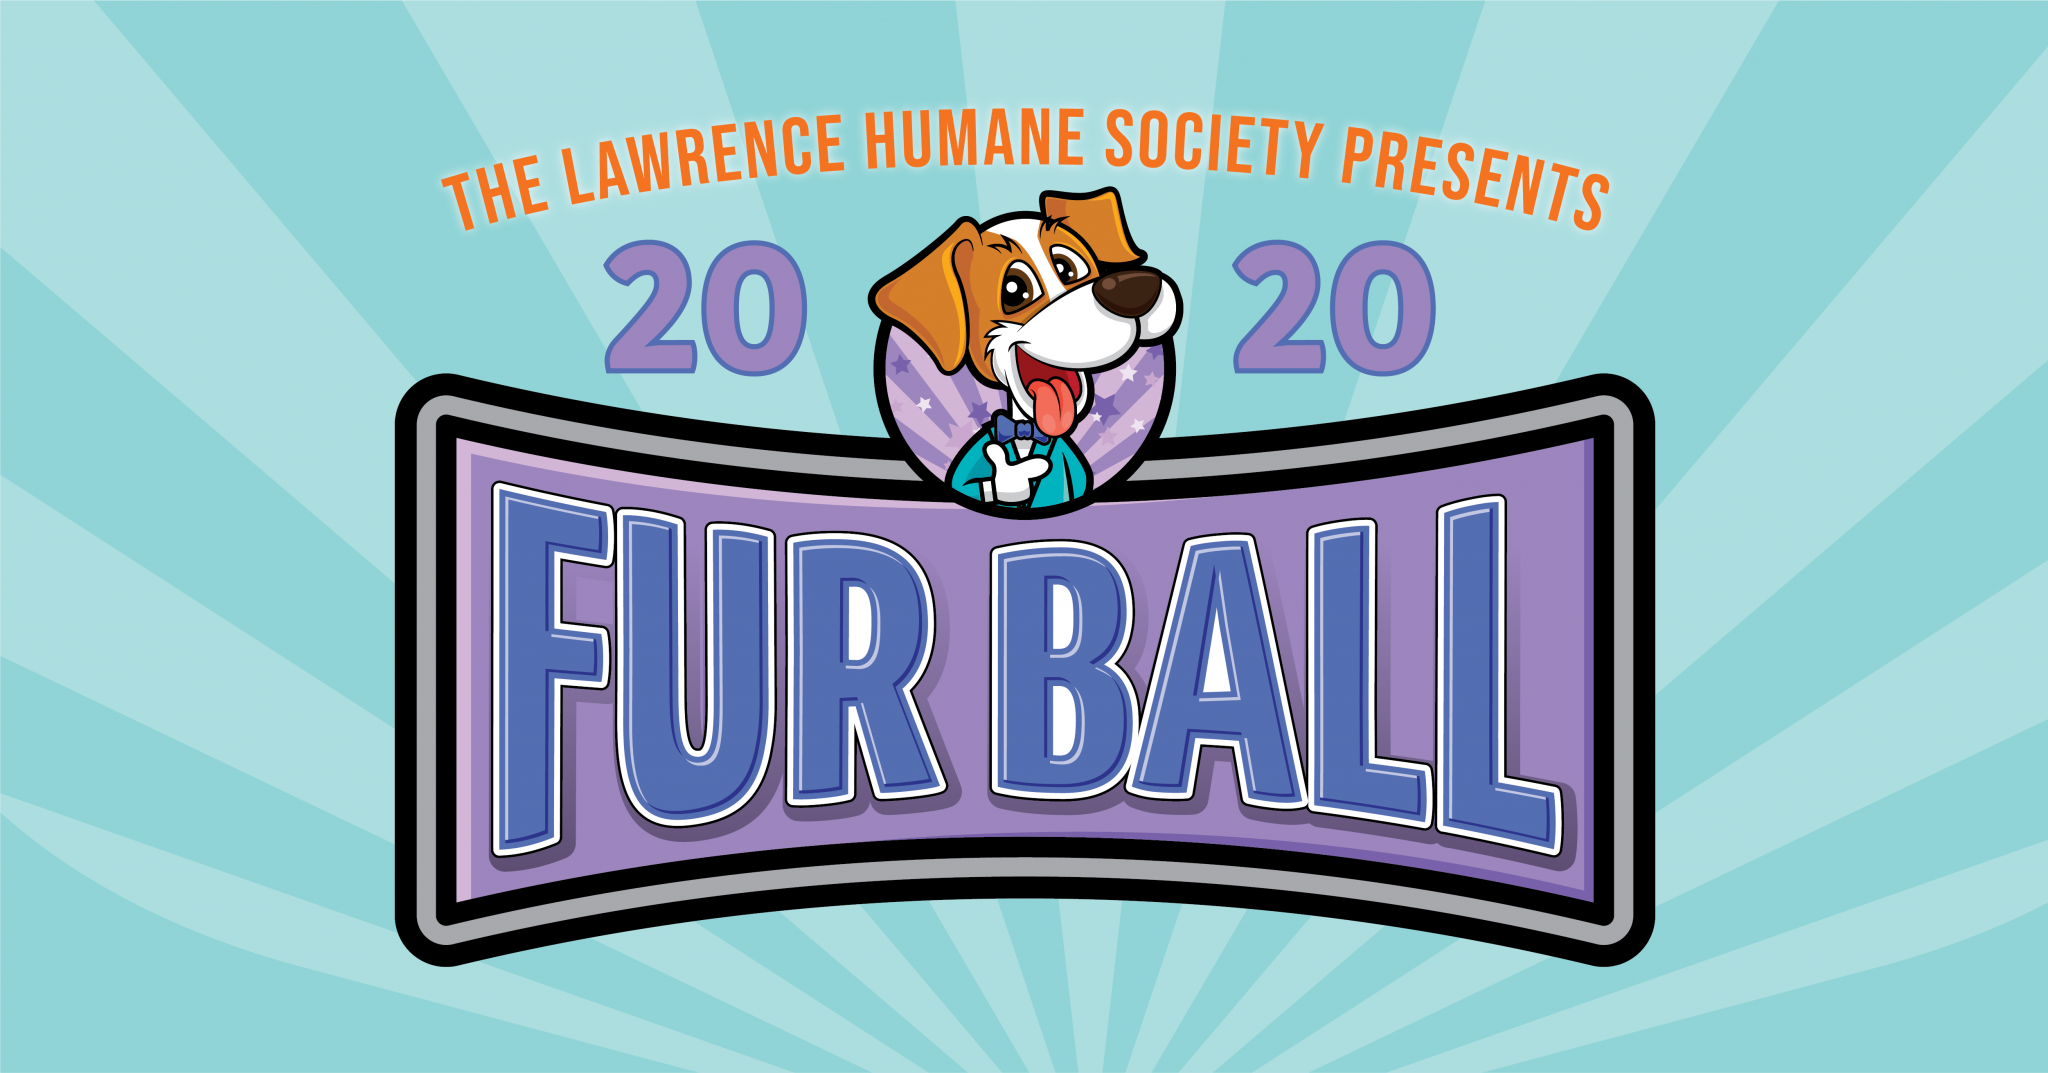 Seven Reasons Why You'll Love Our Fur Ball Variety Show Lawrence Humane